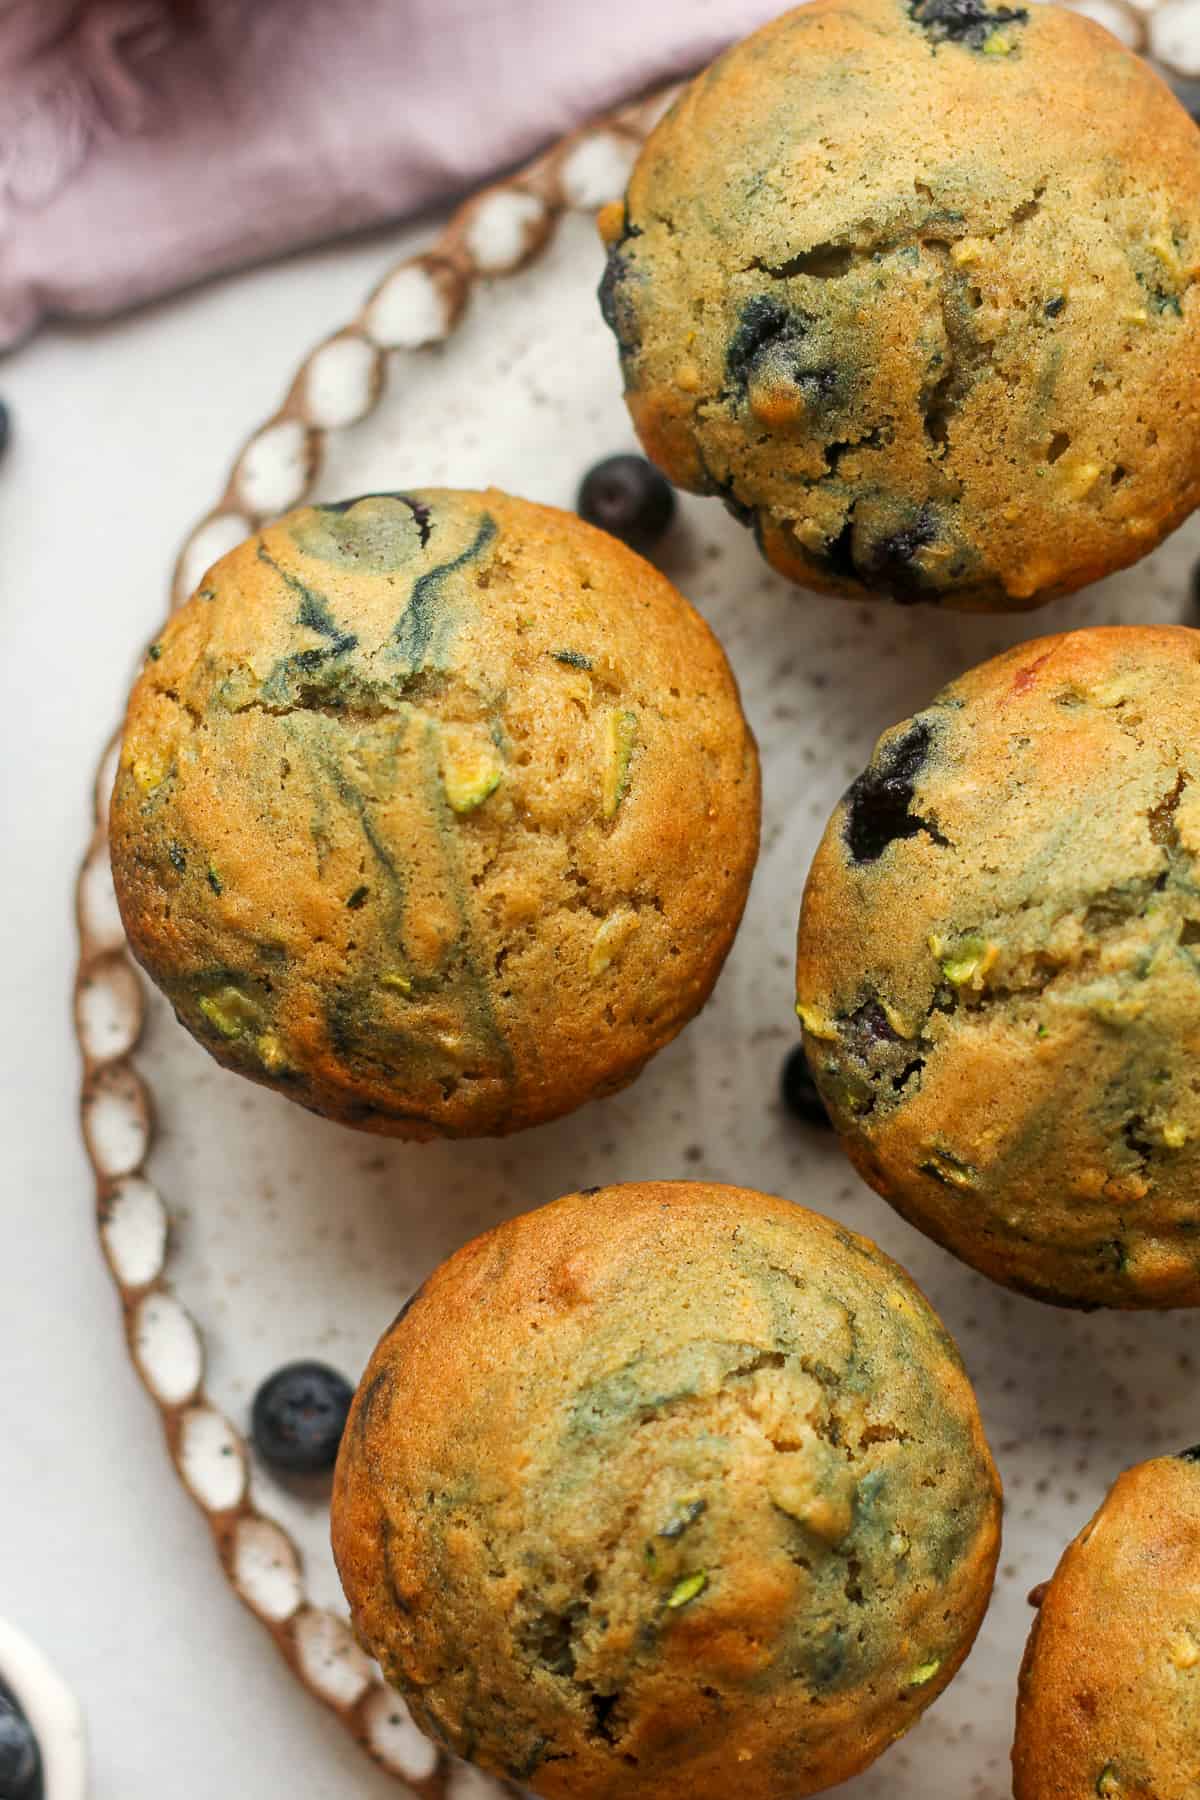 Some blueberry zucchini muffins on a plate.